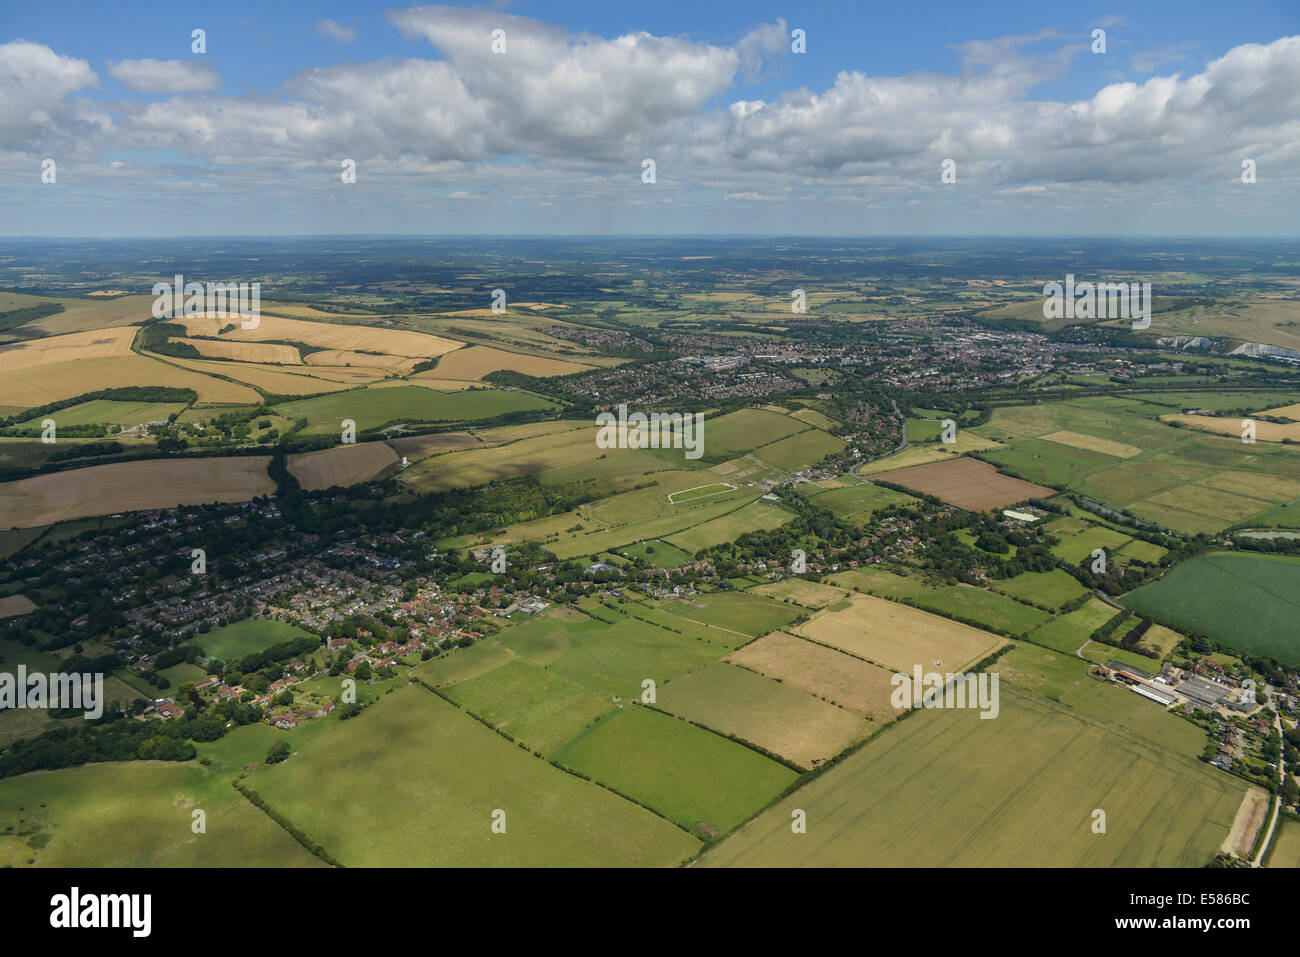 An aerial view showing the East Sussex countryside with Kingston near Lewes in the foreground. Stock Photo